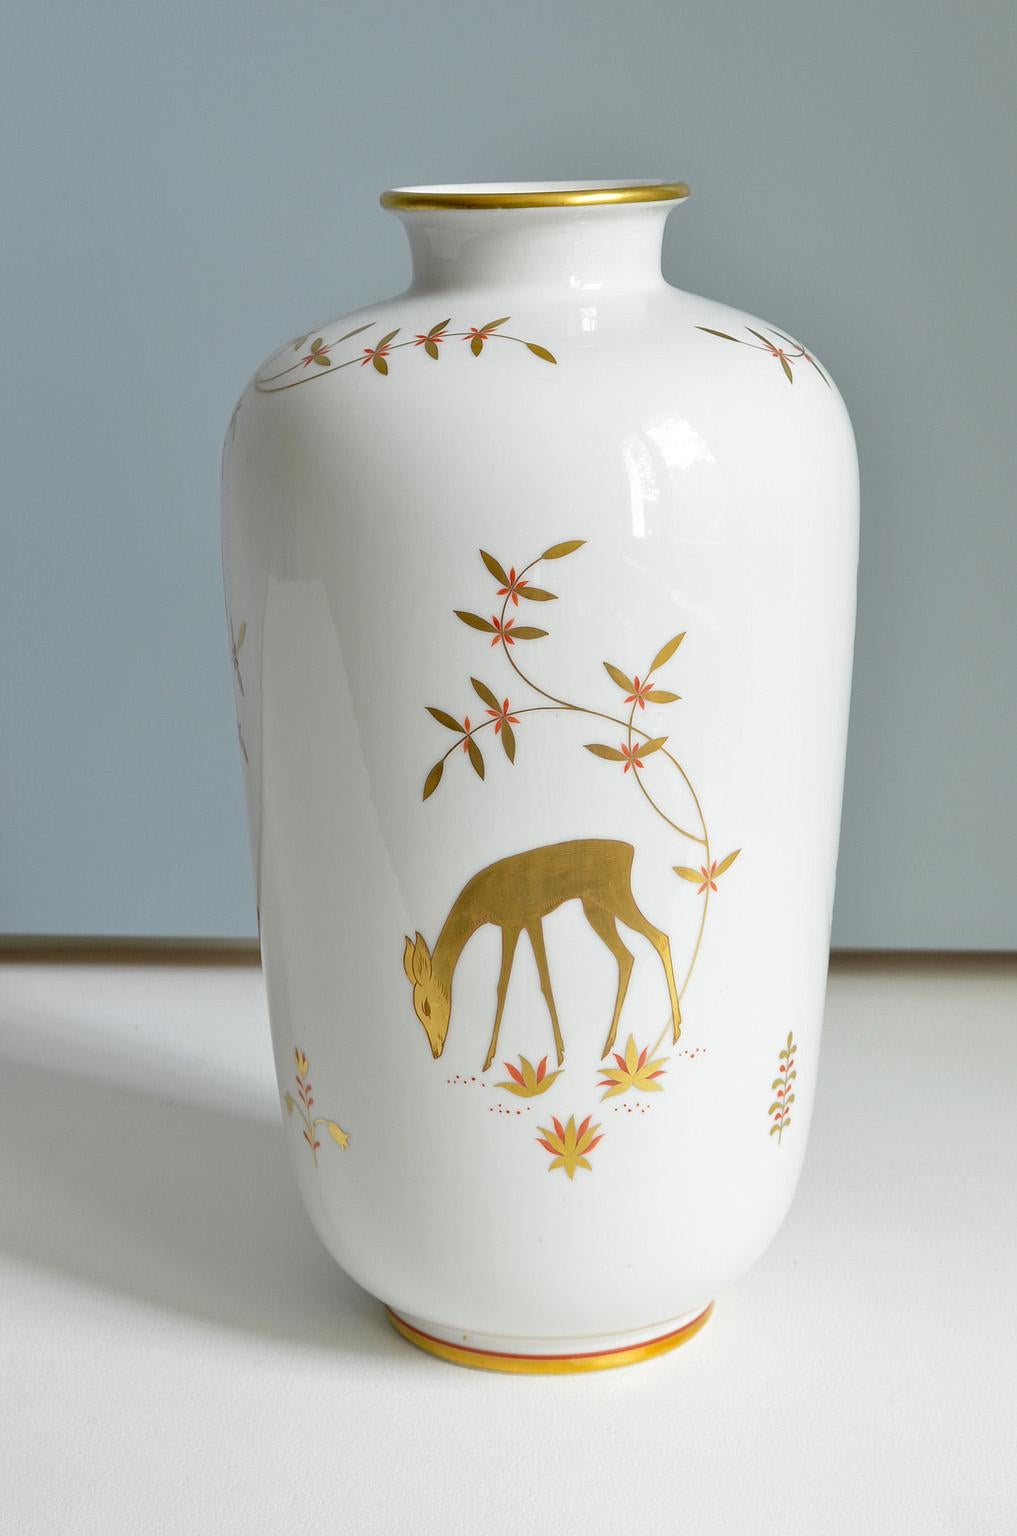 Art Deco porcelain vase by Greiner for Heinrich in Selb, Bavaria, Germany.
White and gold hand painted vase with deer and owl decor, 1940s.
    